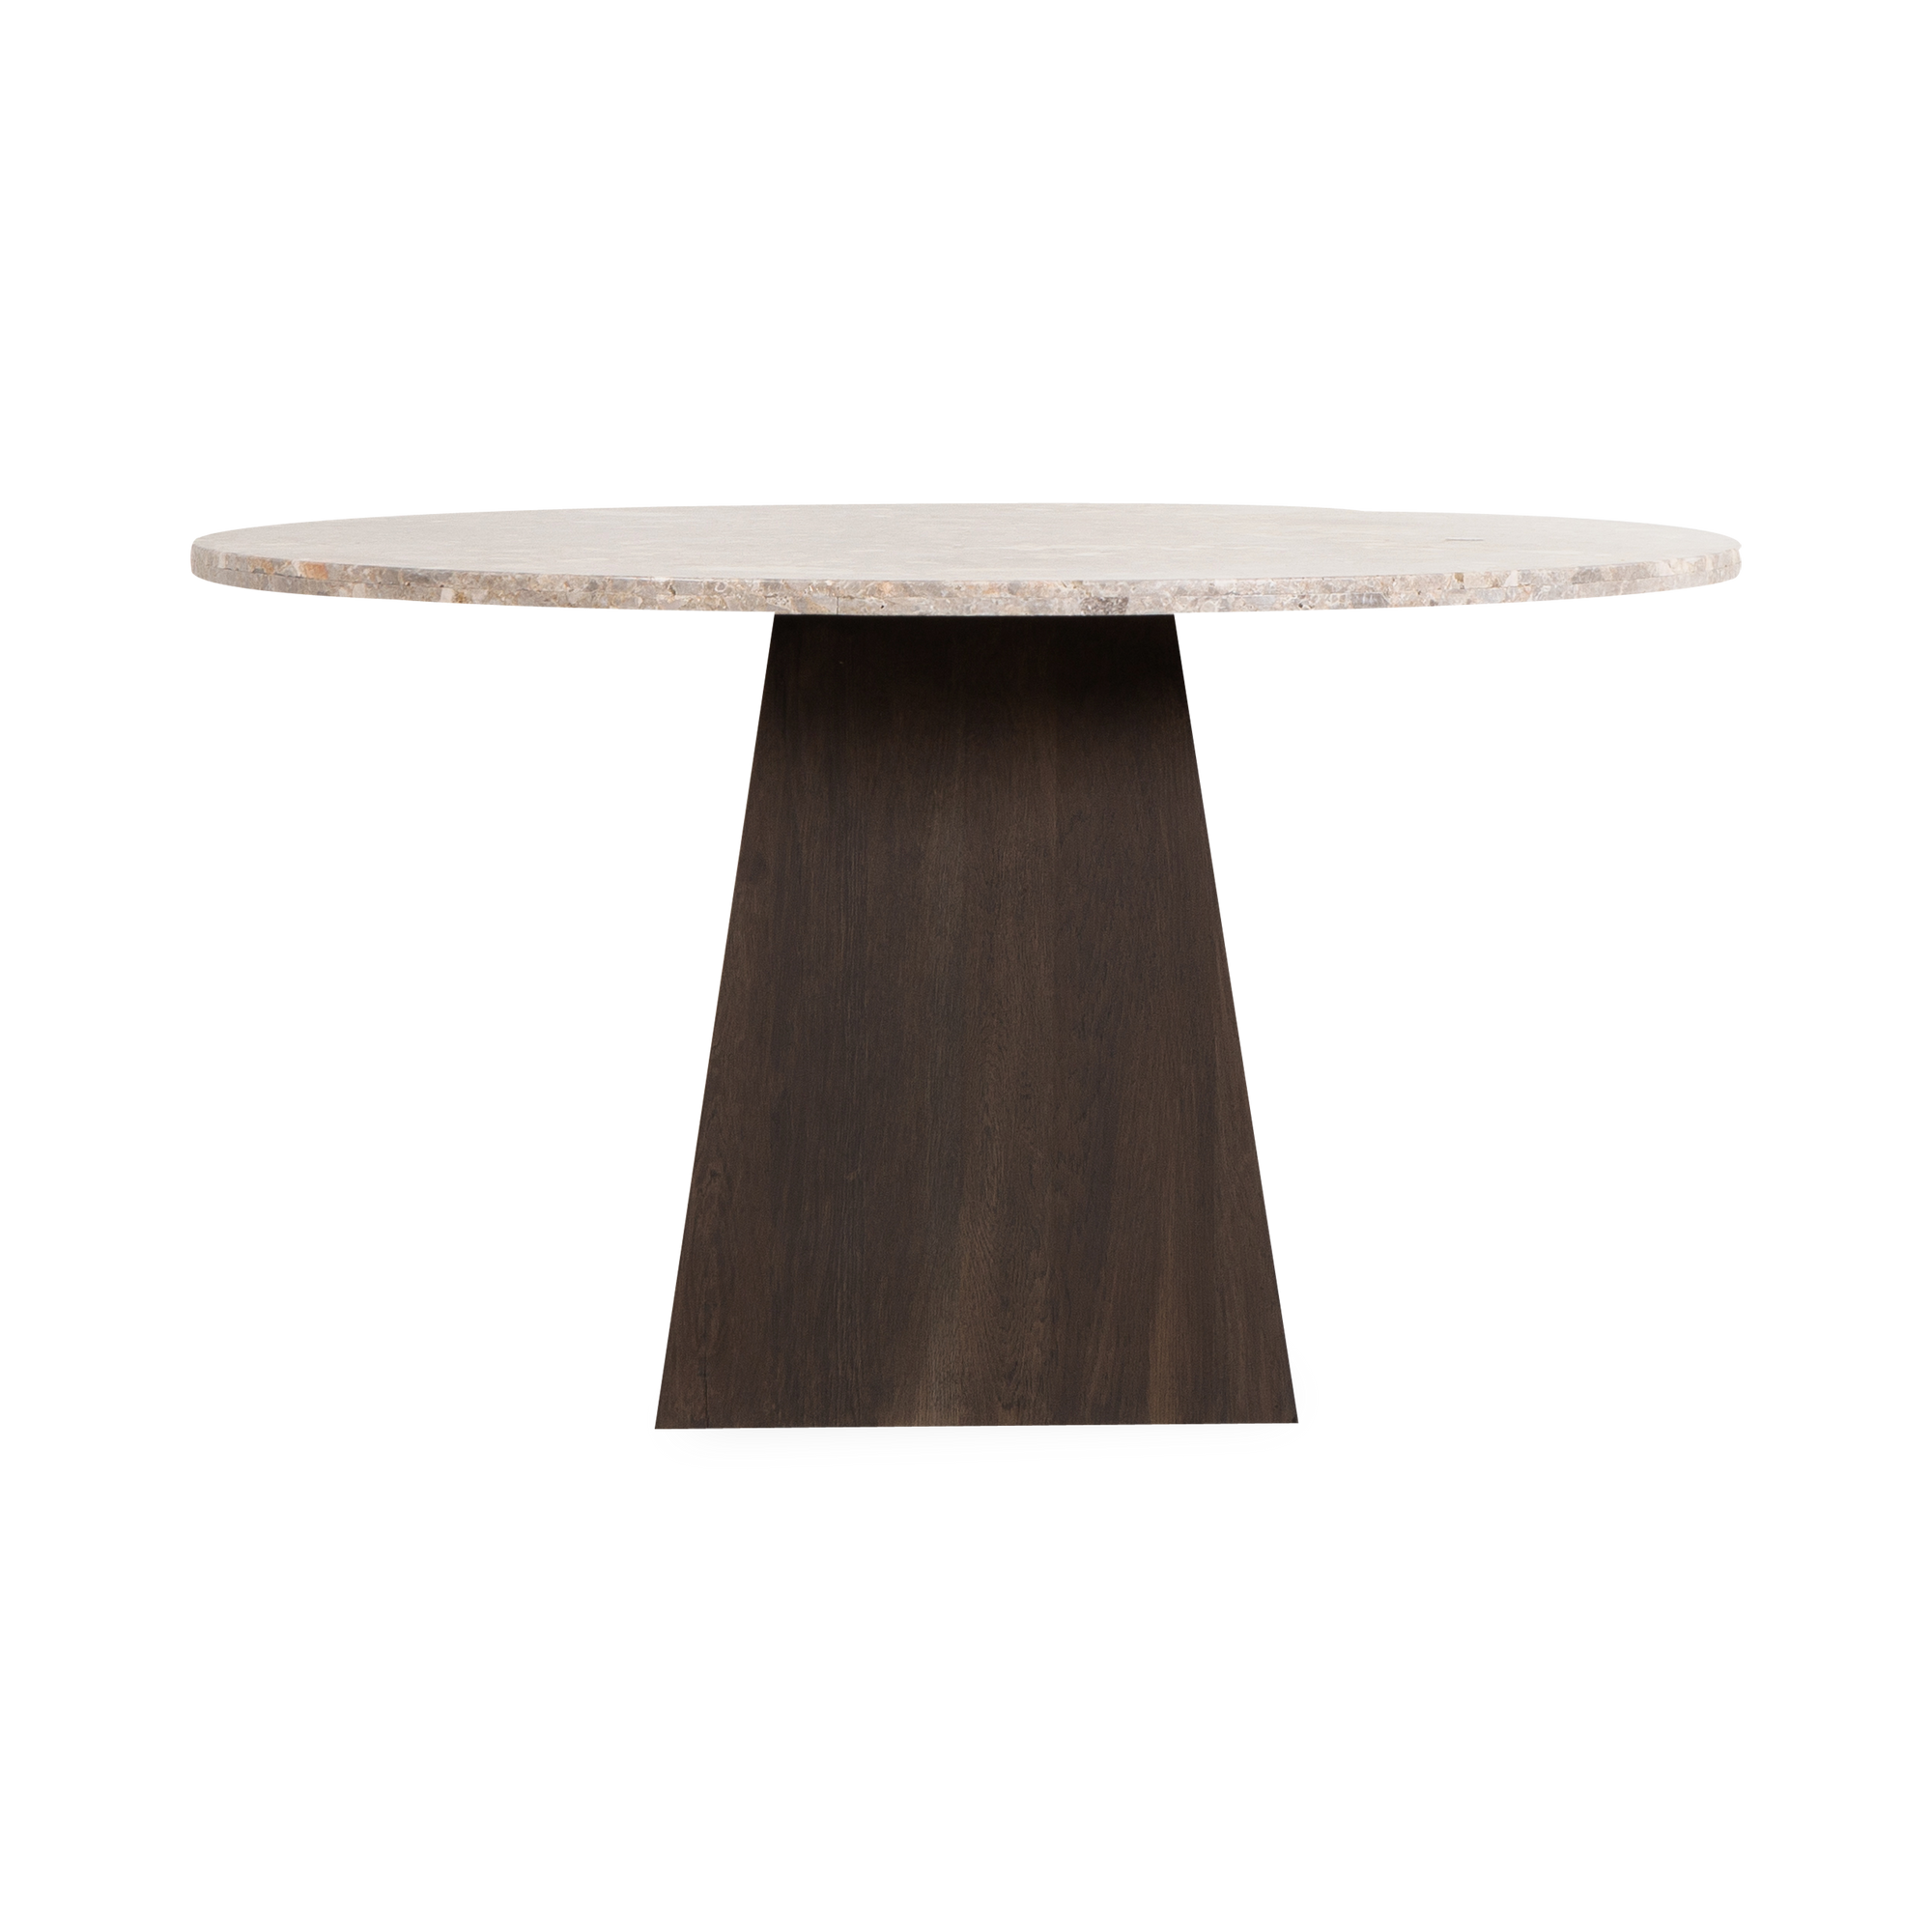 Offering bold brutalist forms, the Easton Dining Table makes the most of nature's elements.